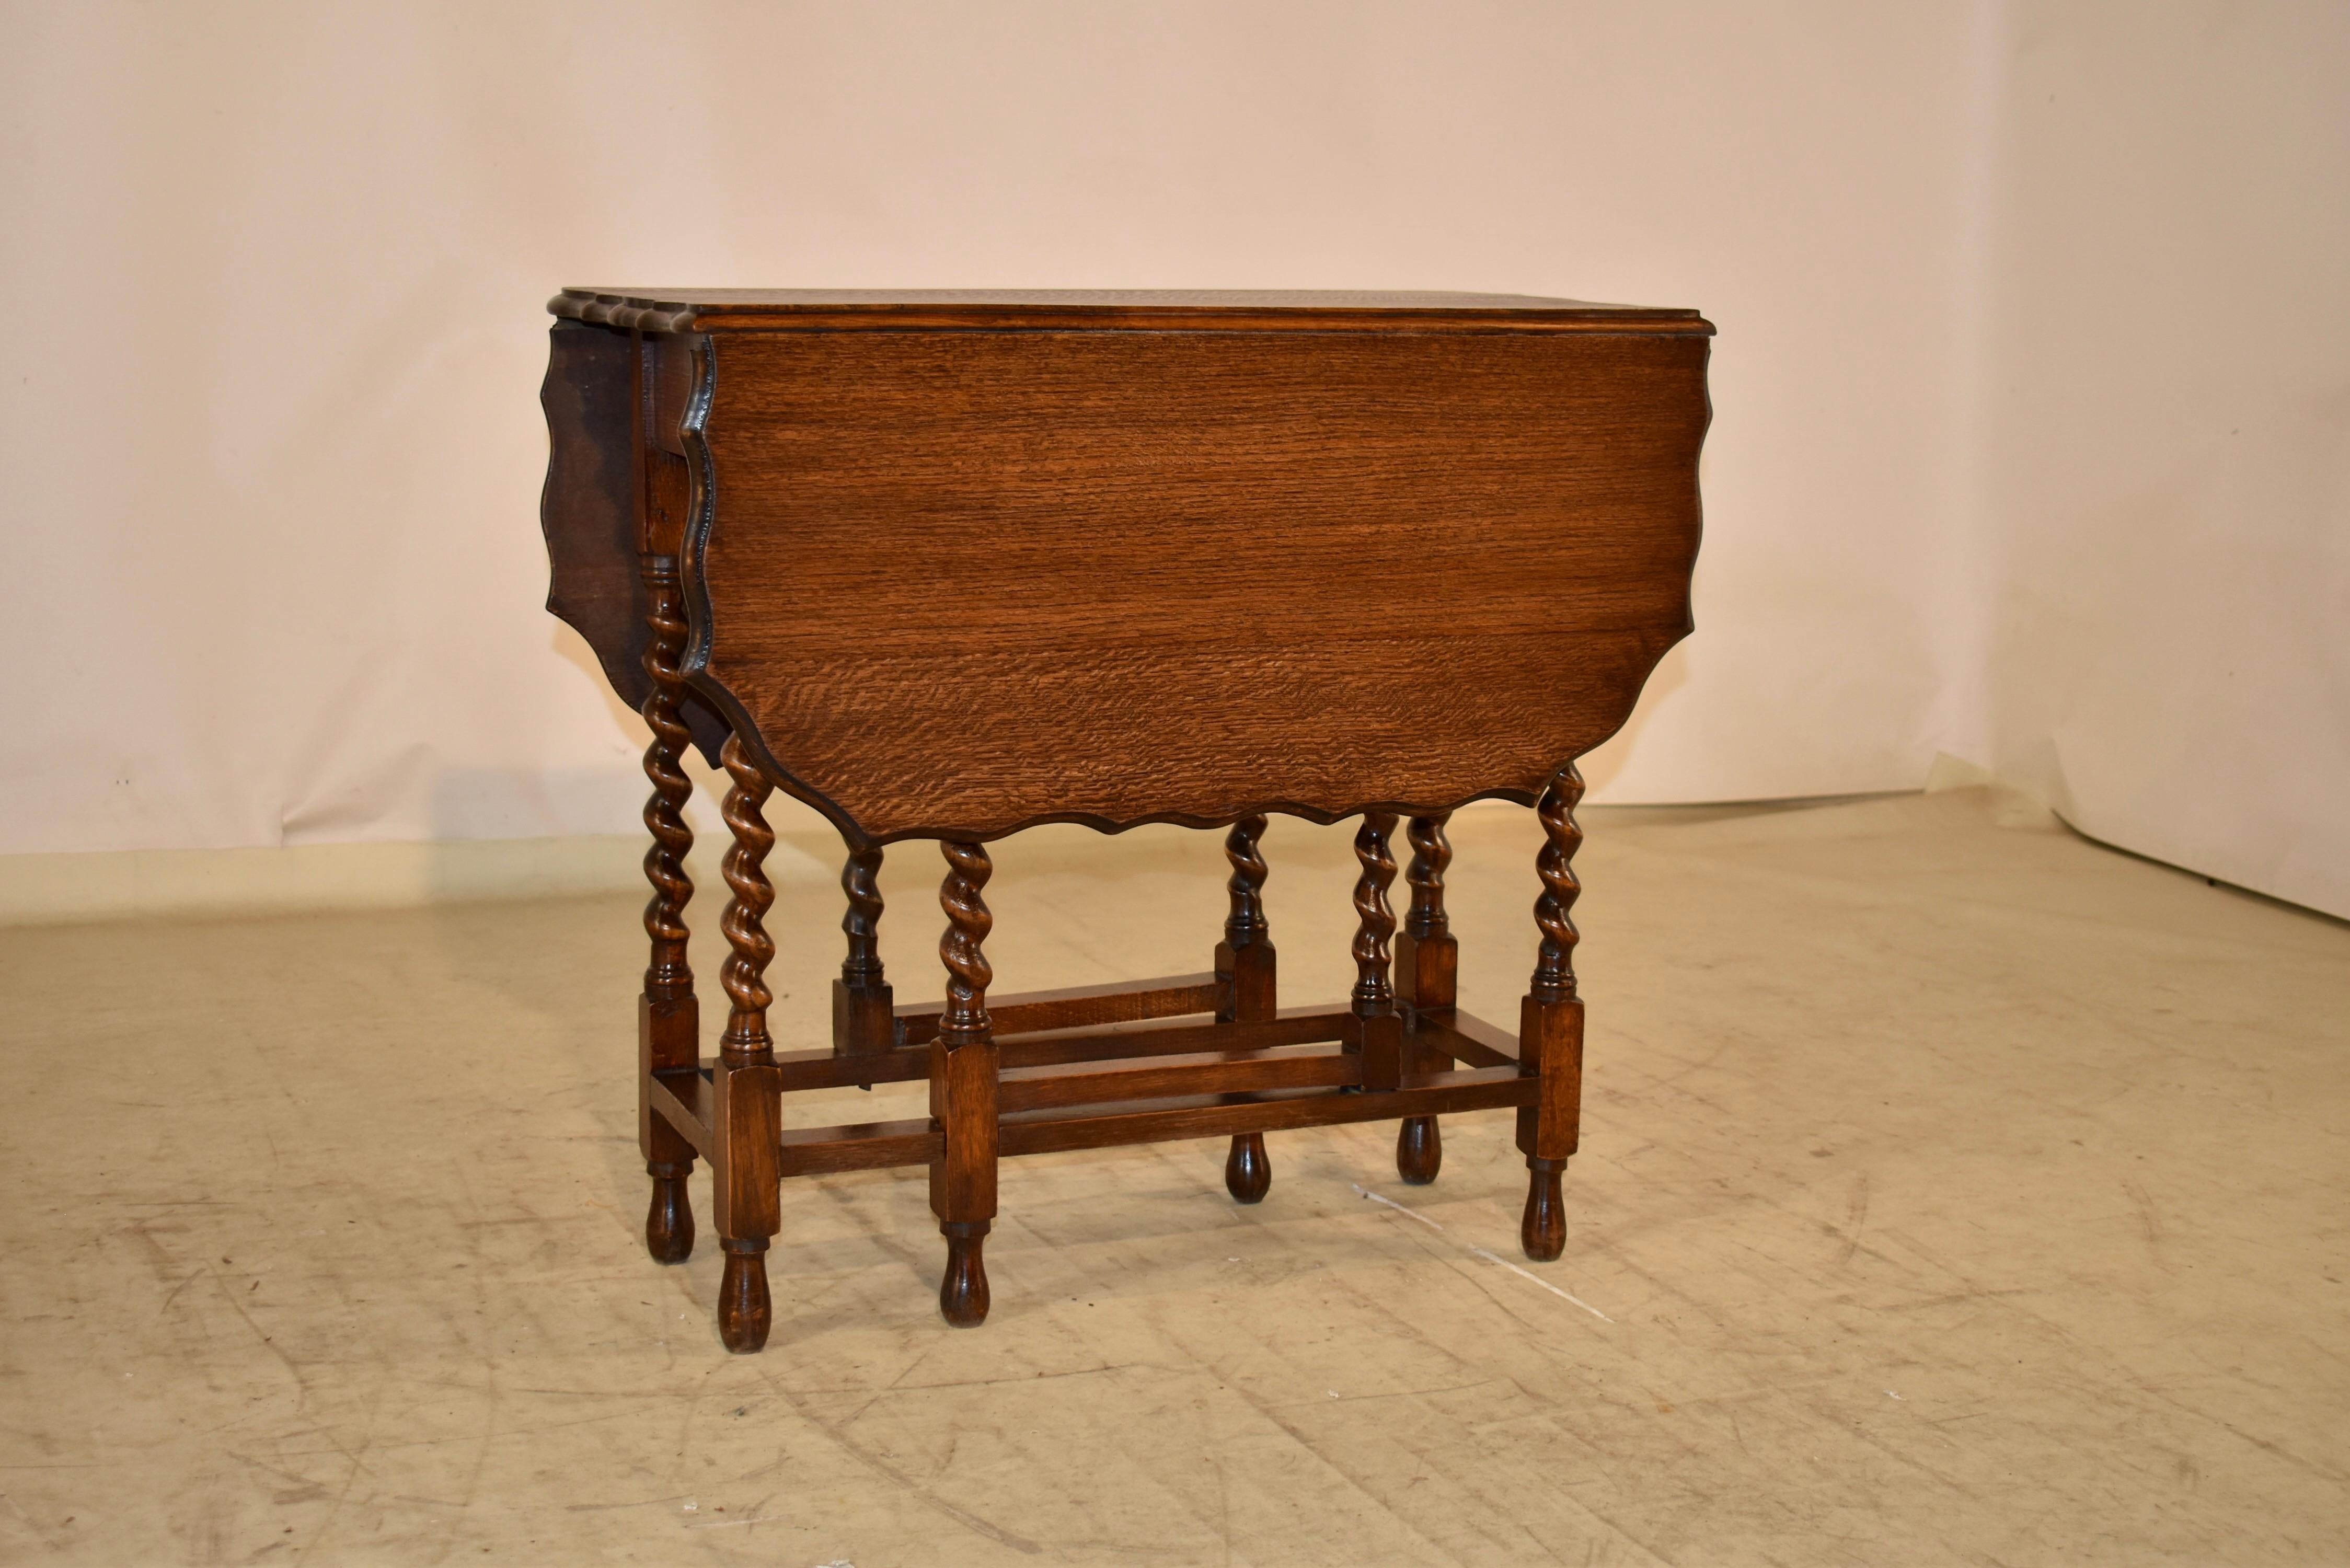 Period Edwardian oak gate leg table from England.  The top has a lovely beveled and scalloped edge, following down to a simple apron and hand turned barely twist legs on the table and gates.  The legs are joined by simple stretchers and are